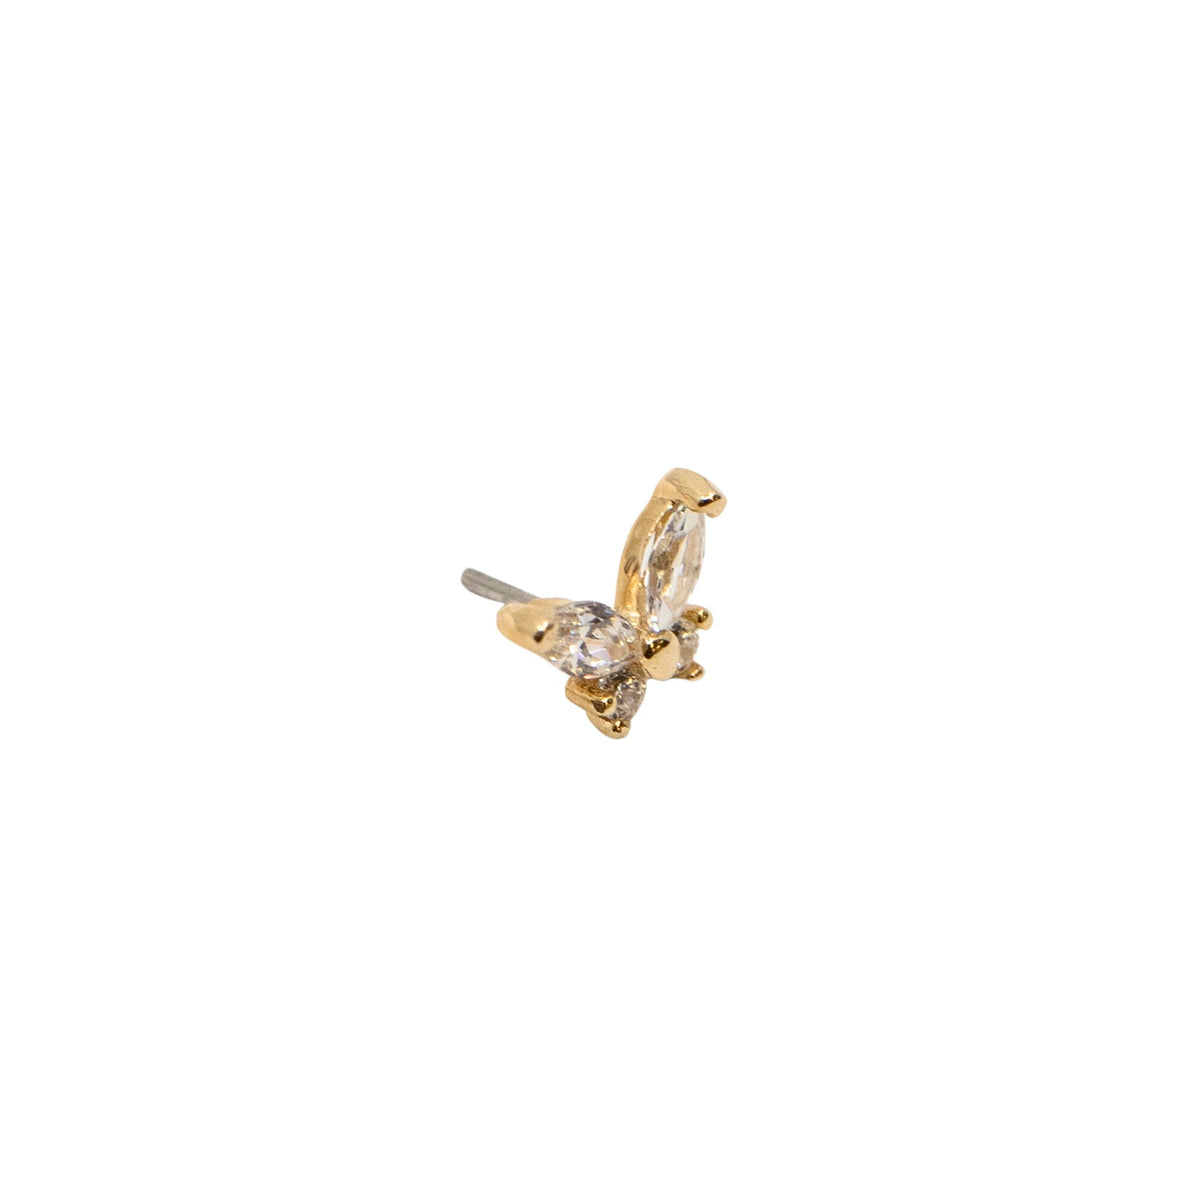 Yellow Gold Studs Crystal Butterfly Stud Earring The Curated Lobe14k gold14k gold topbutterfly